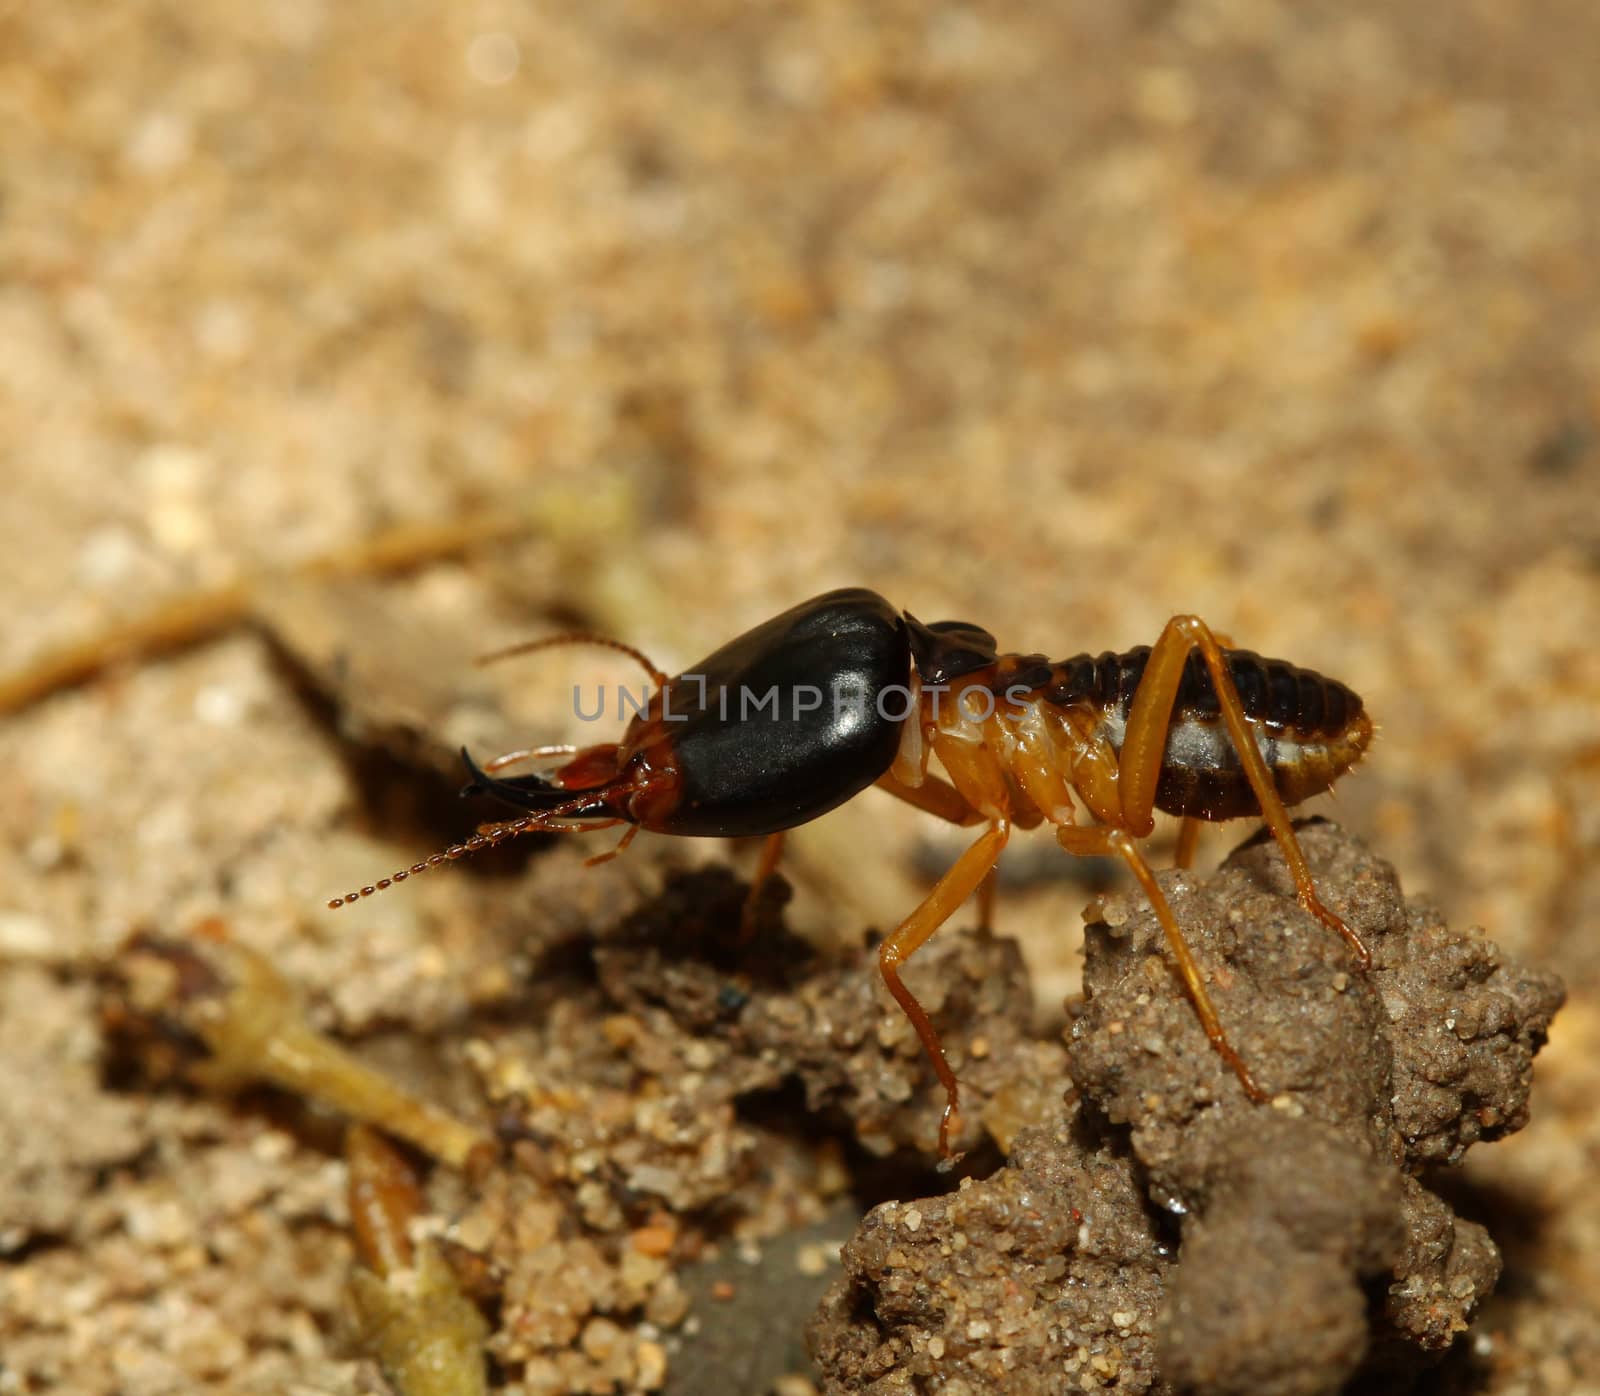 the big soldier termite of soil eaters by pumppump